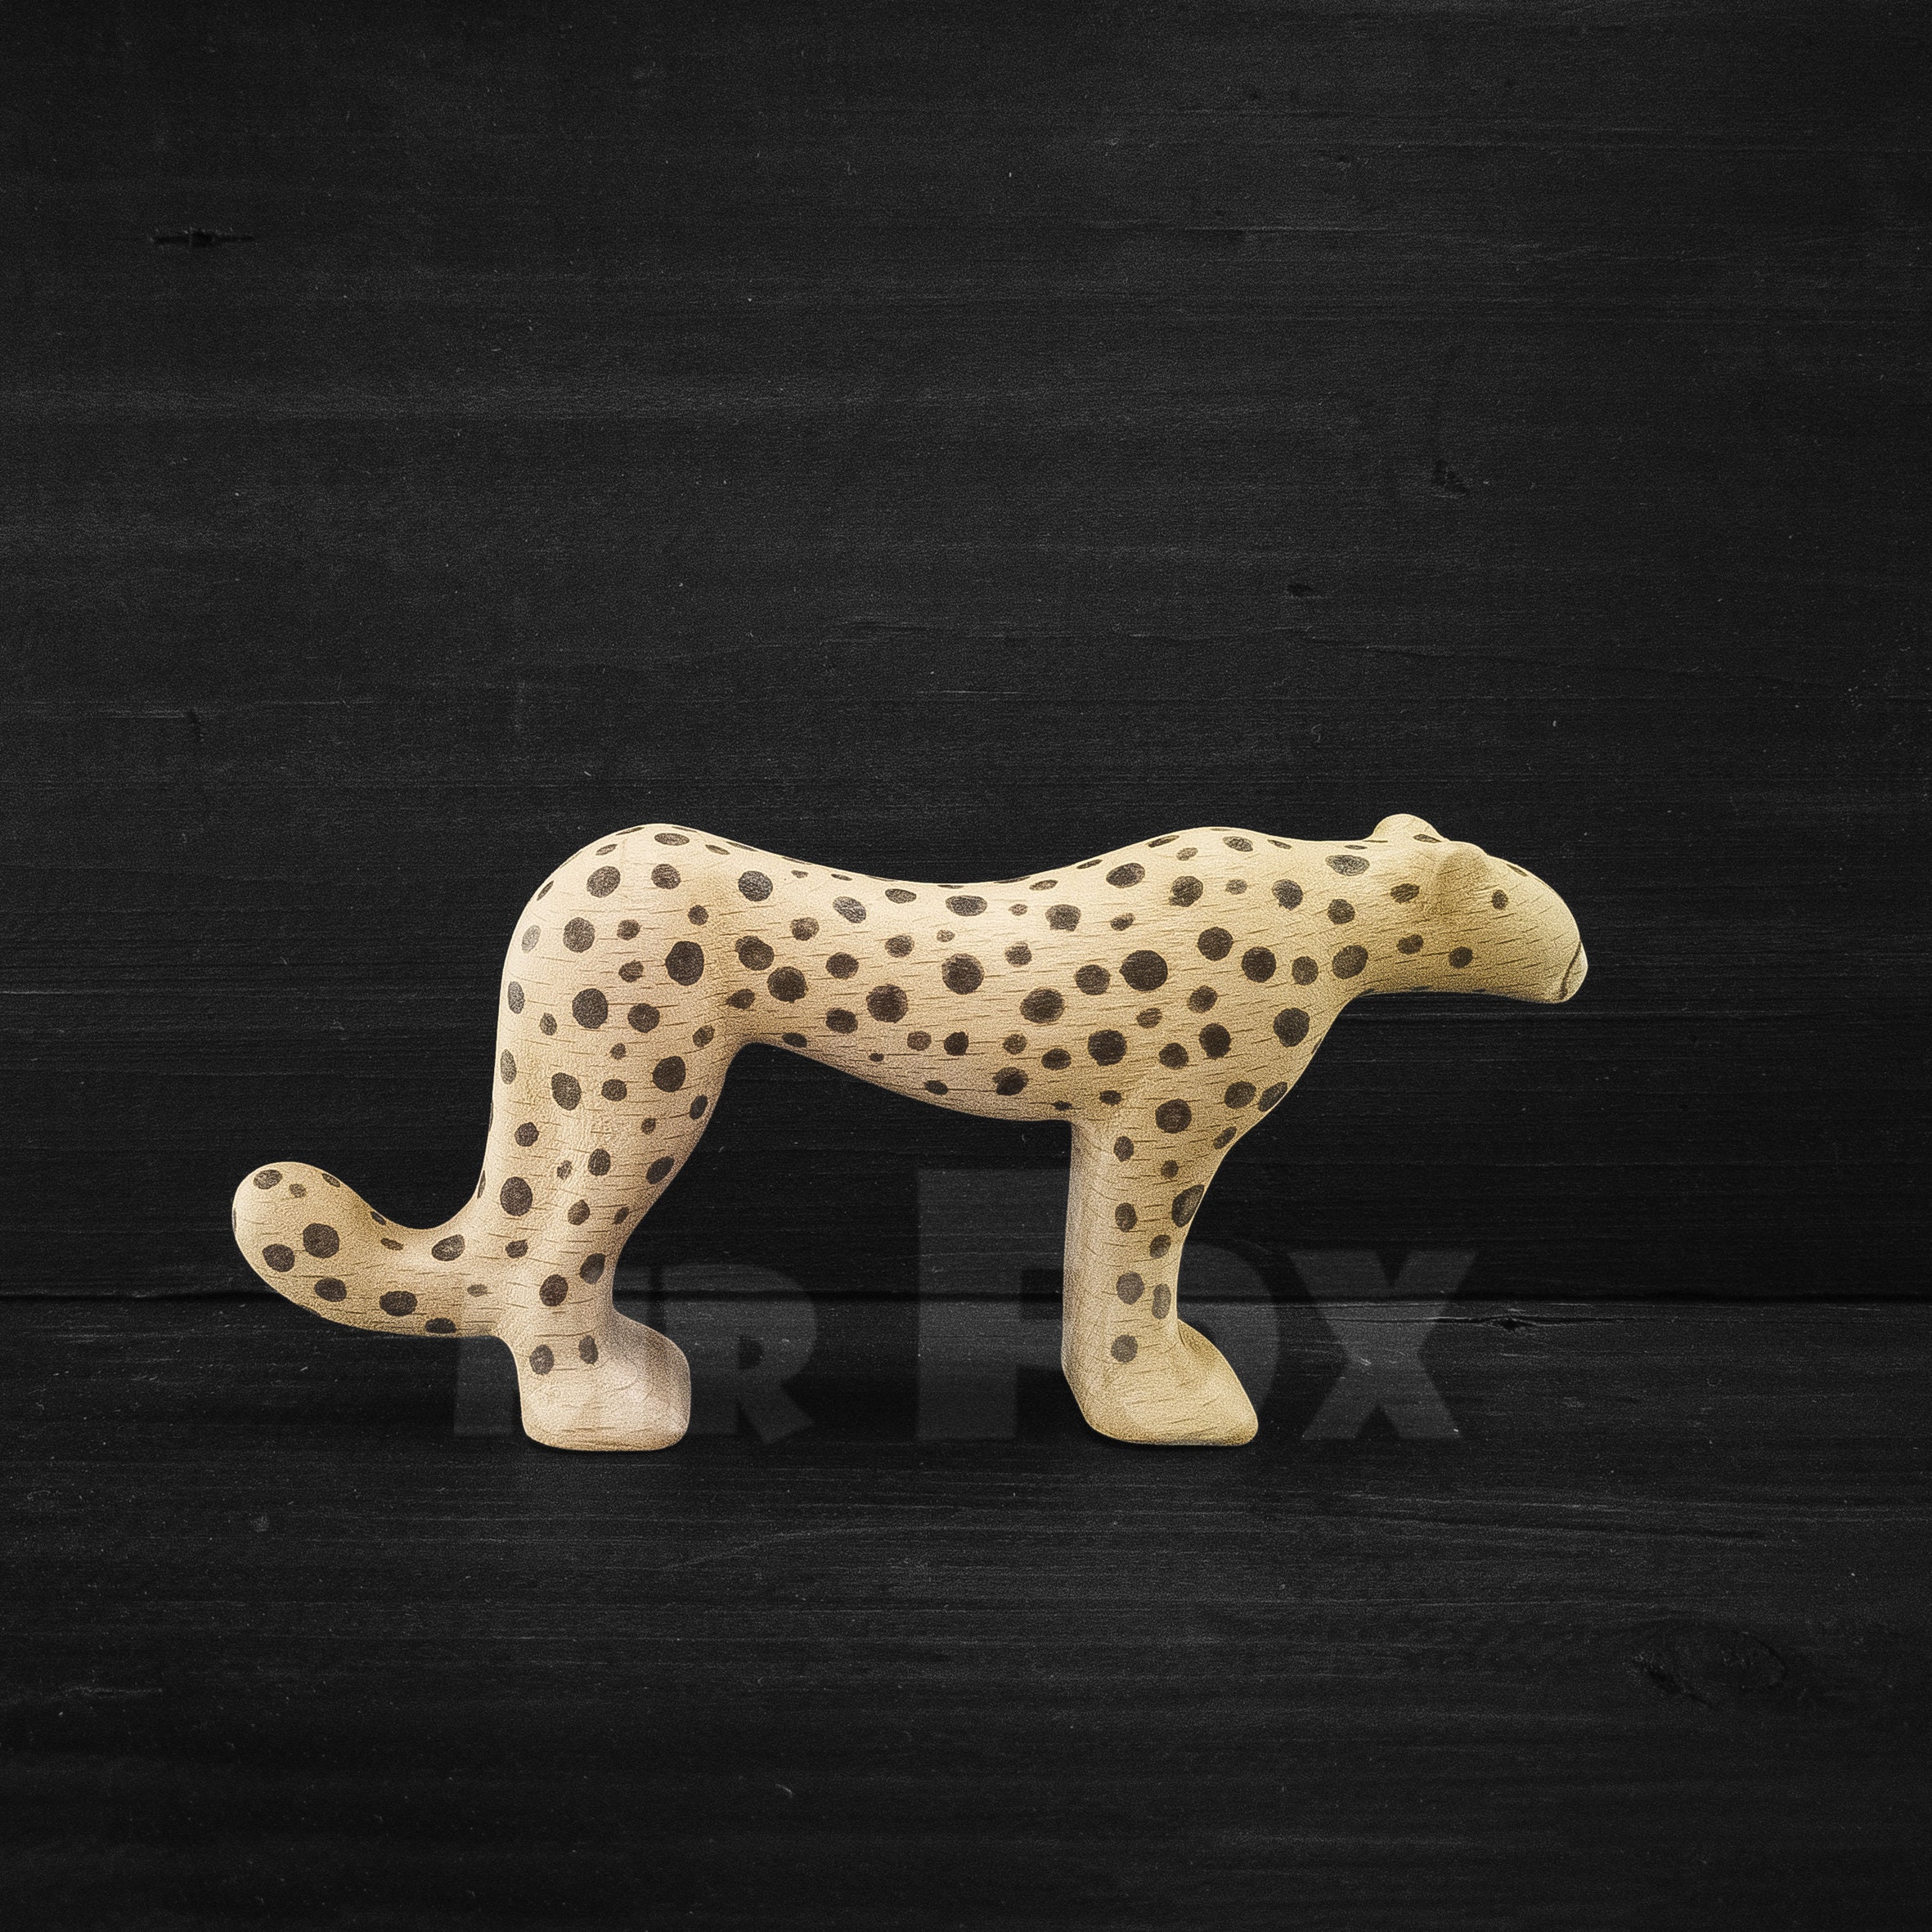 Wooden Toy Cheetah - African Animal Toy